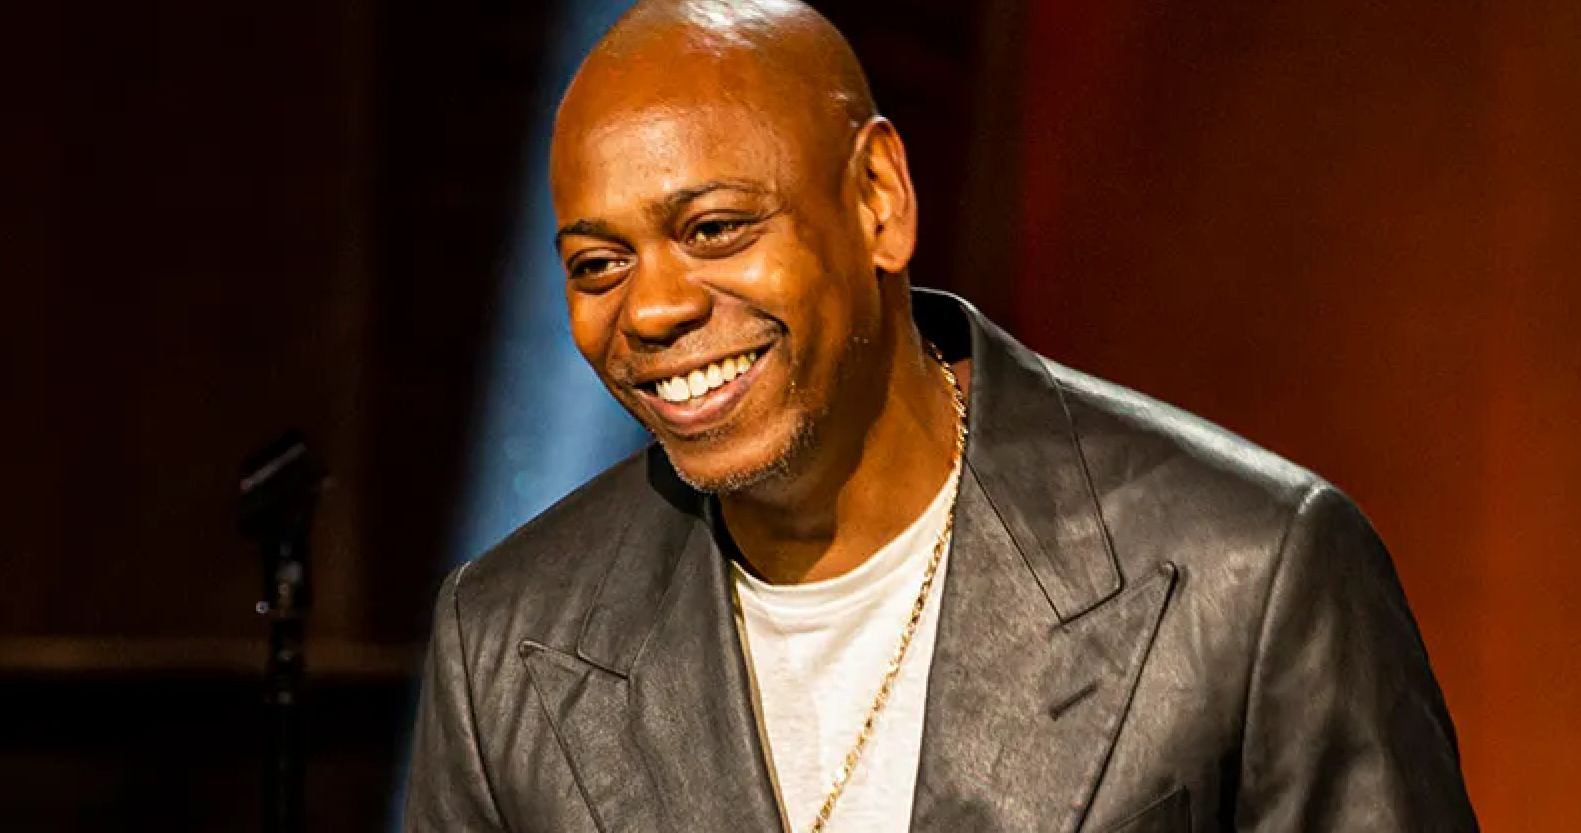 Dave Chappelle Sparks Controversy Again with Netflix Special The Closer